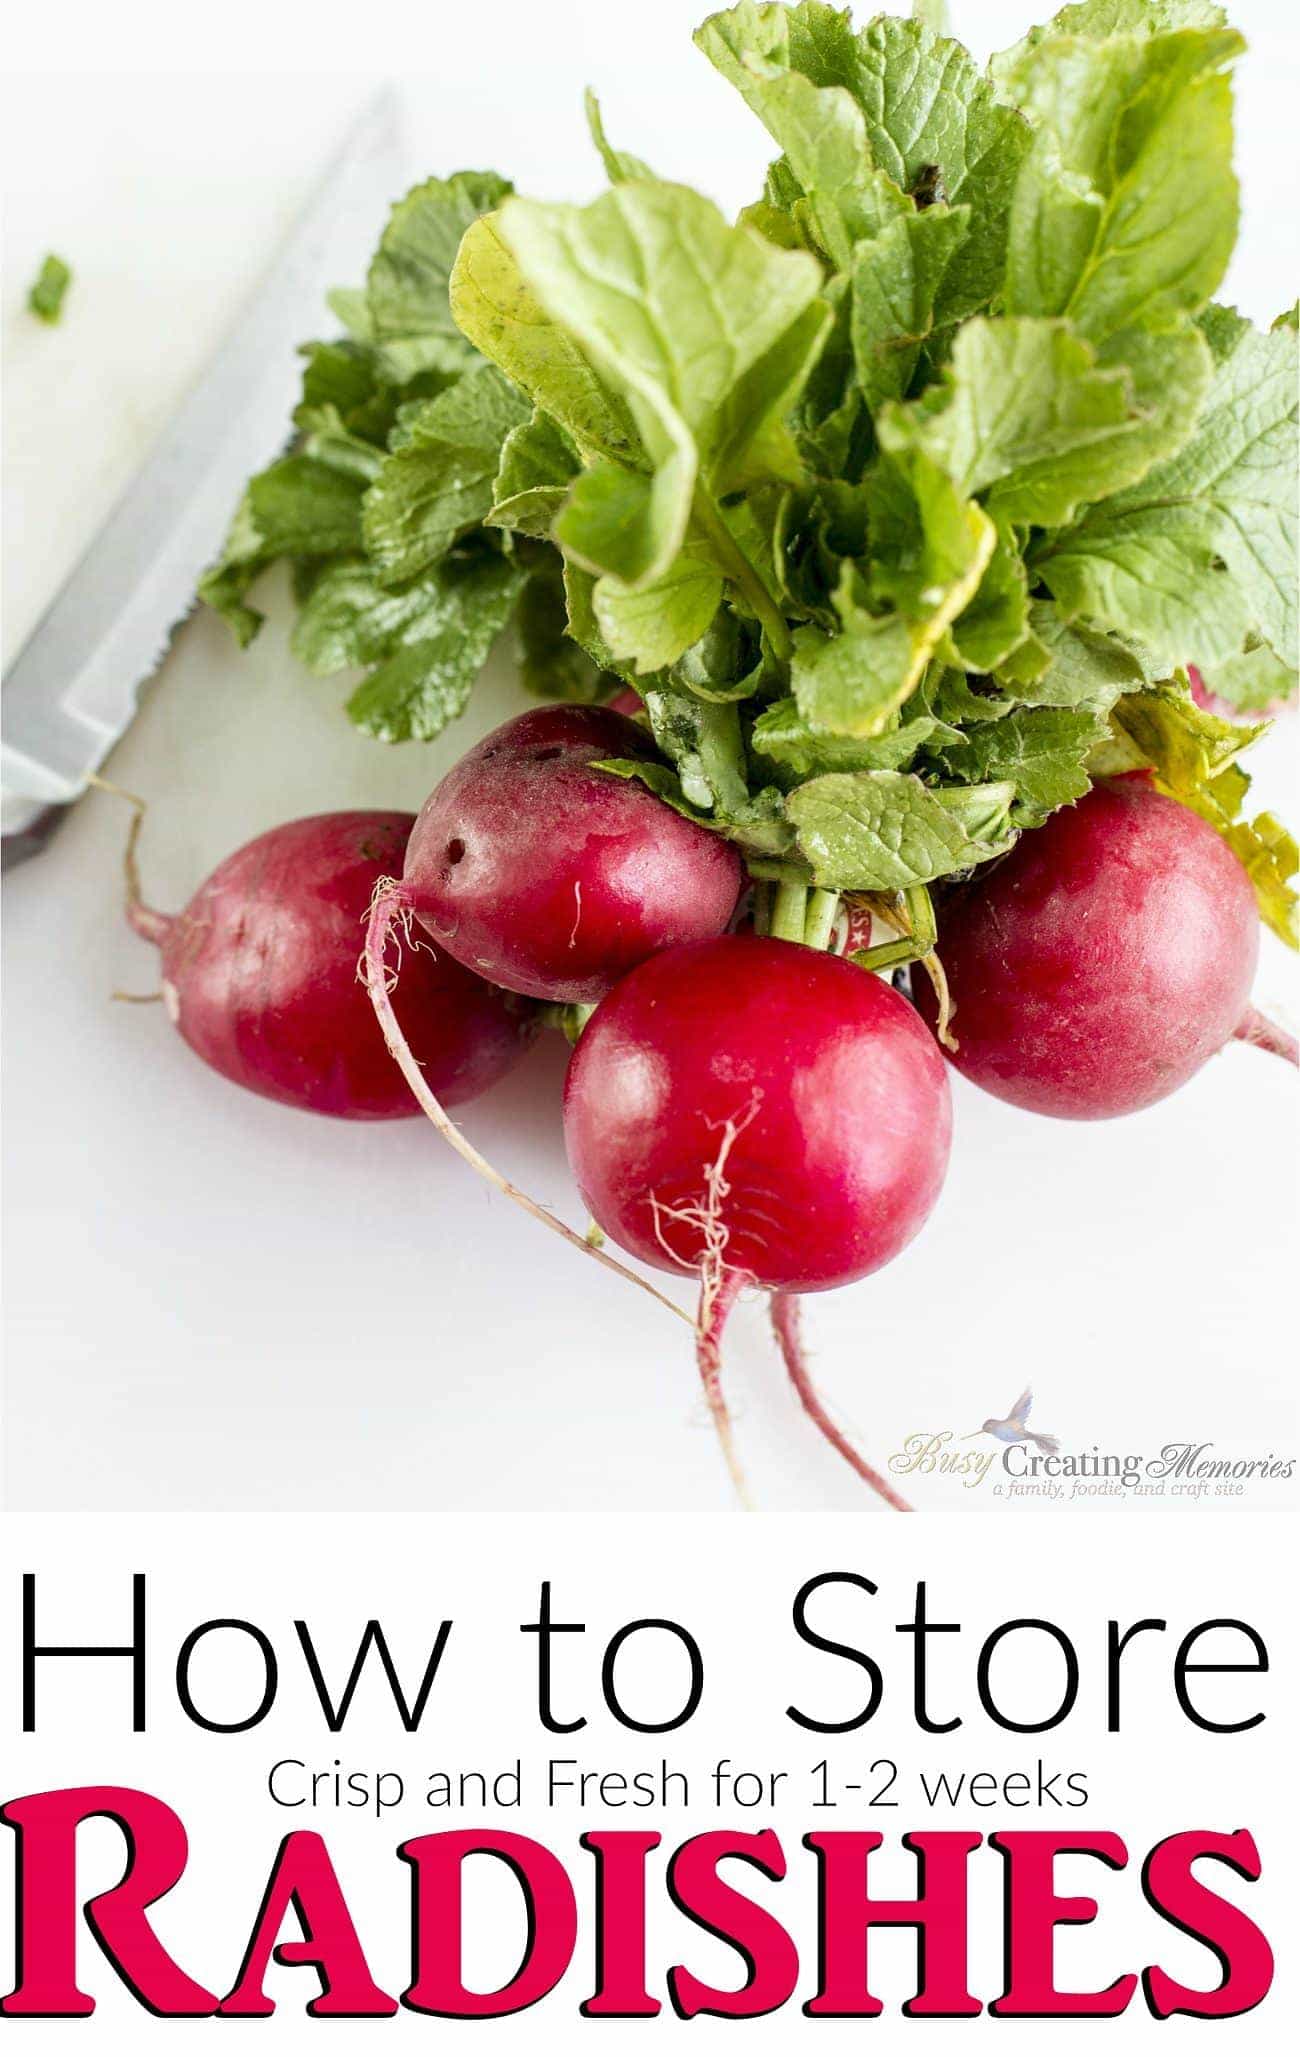 How to Store Radishes to keep them Fresh and Crisp.